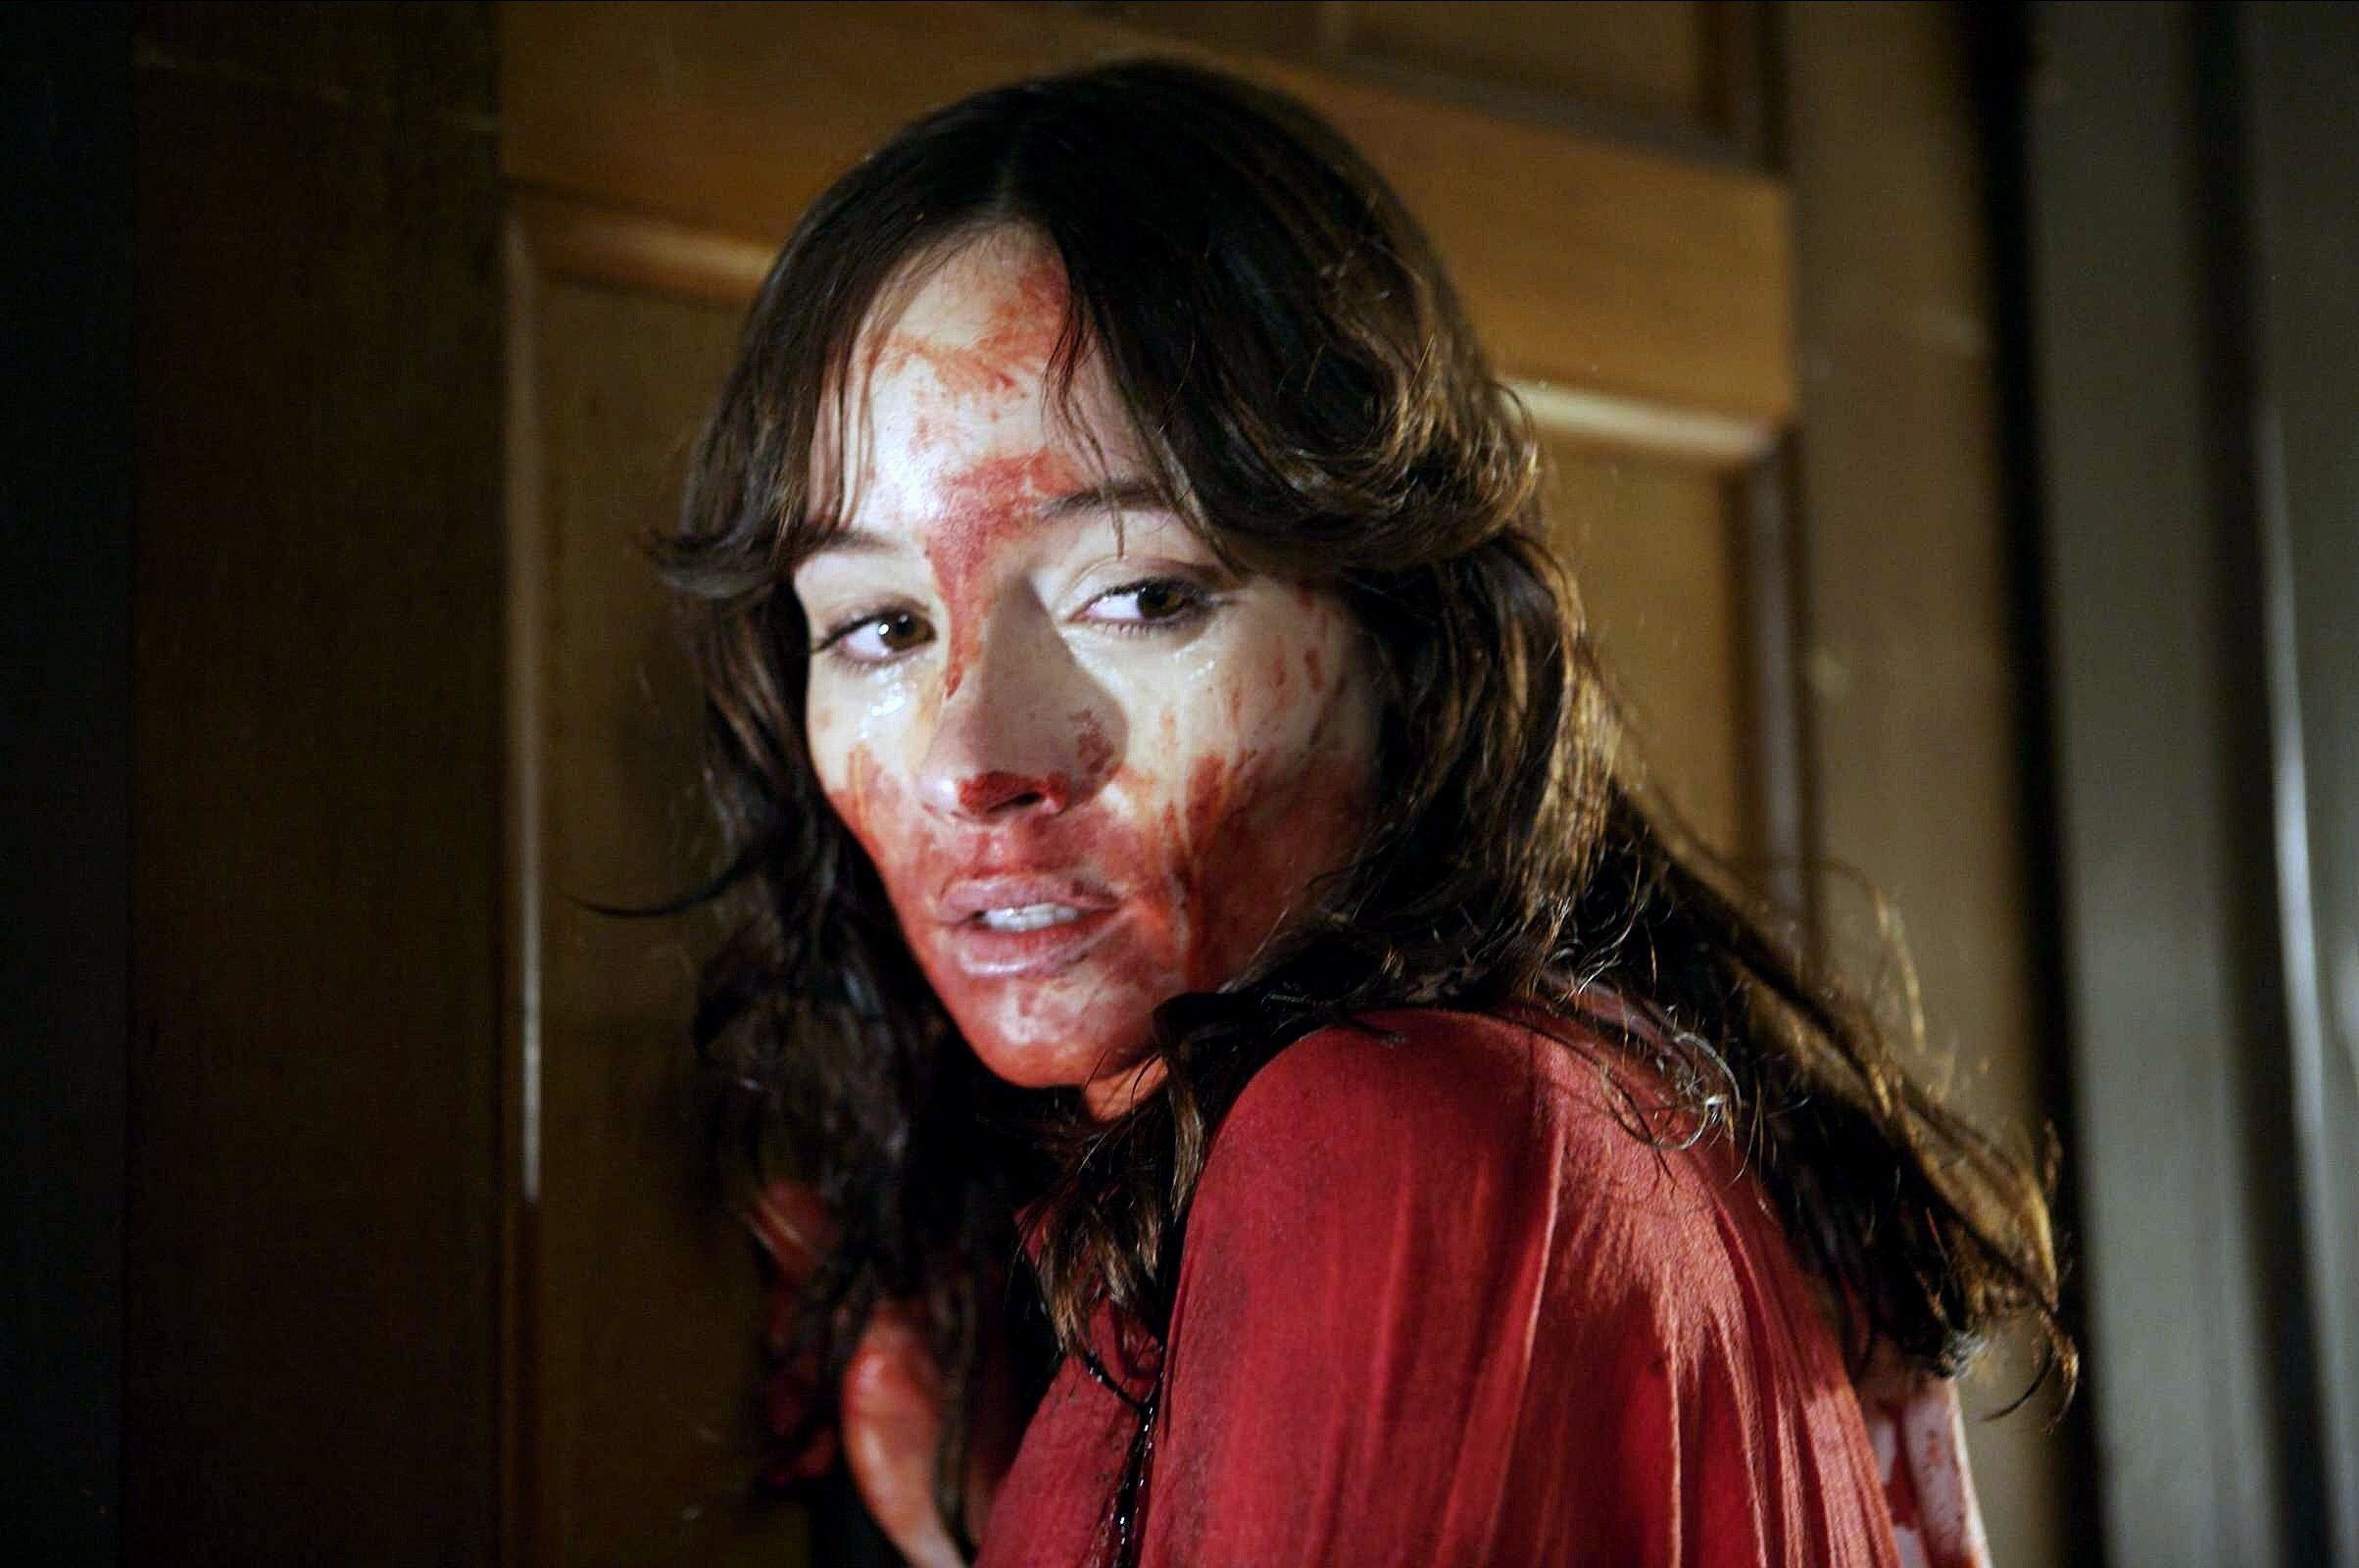 A blood covered woman leans against a large wooden door